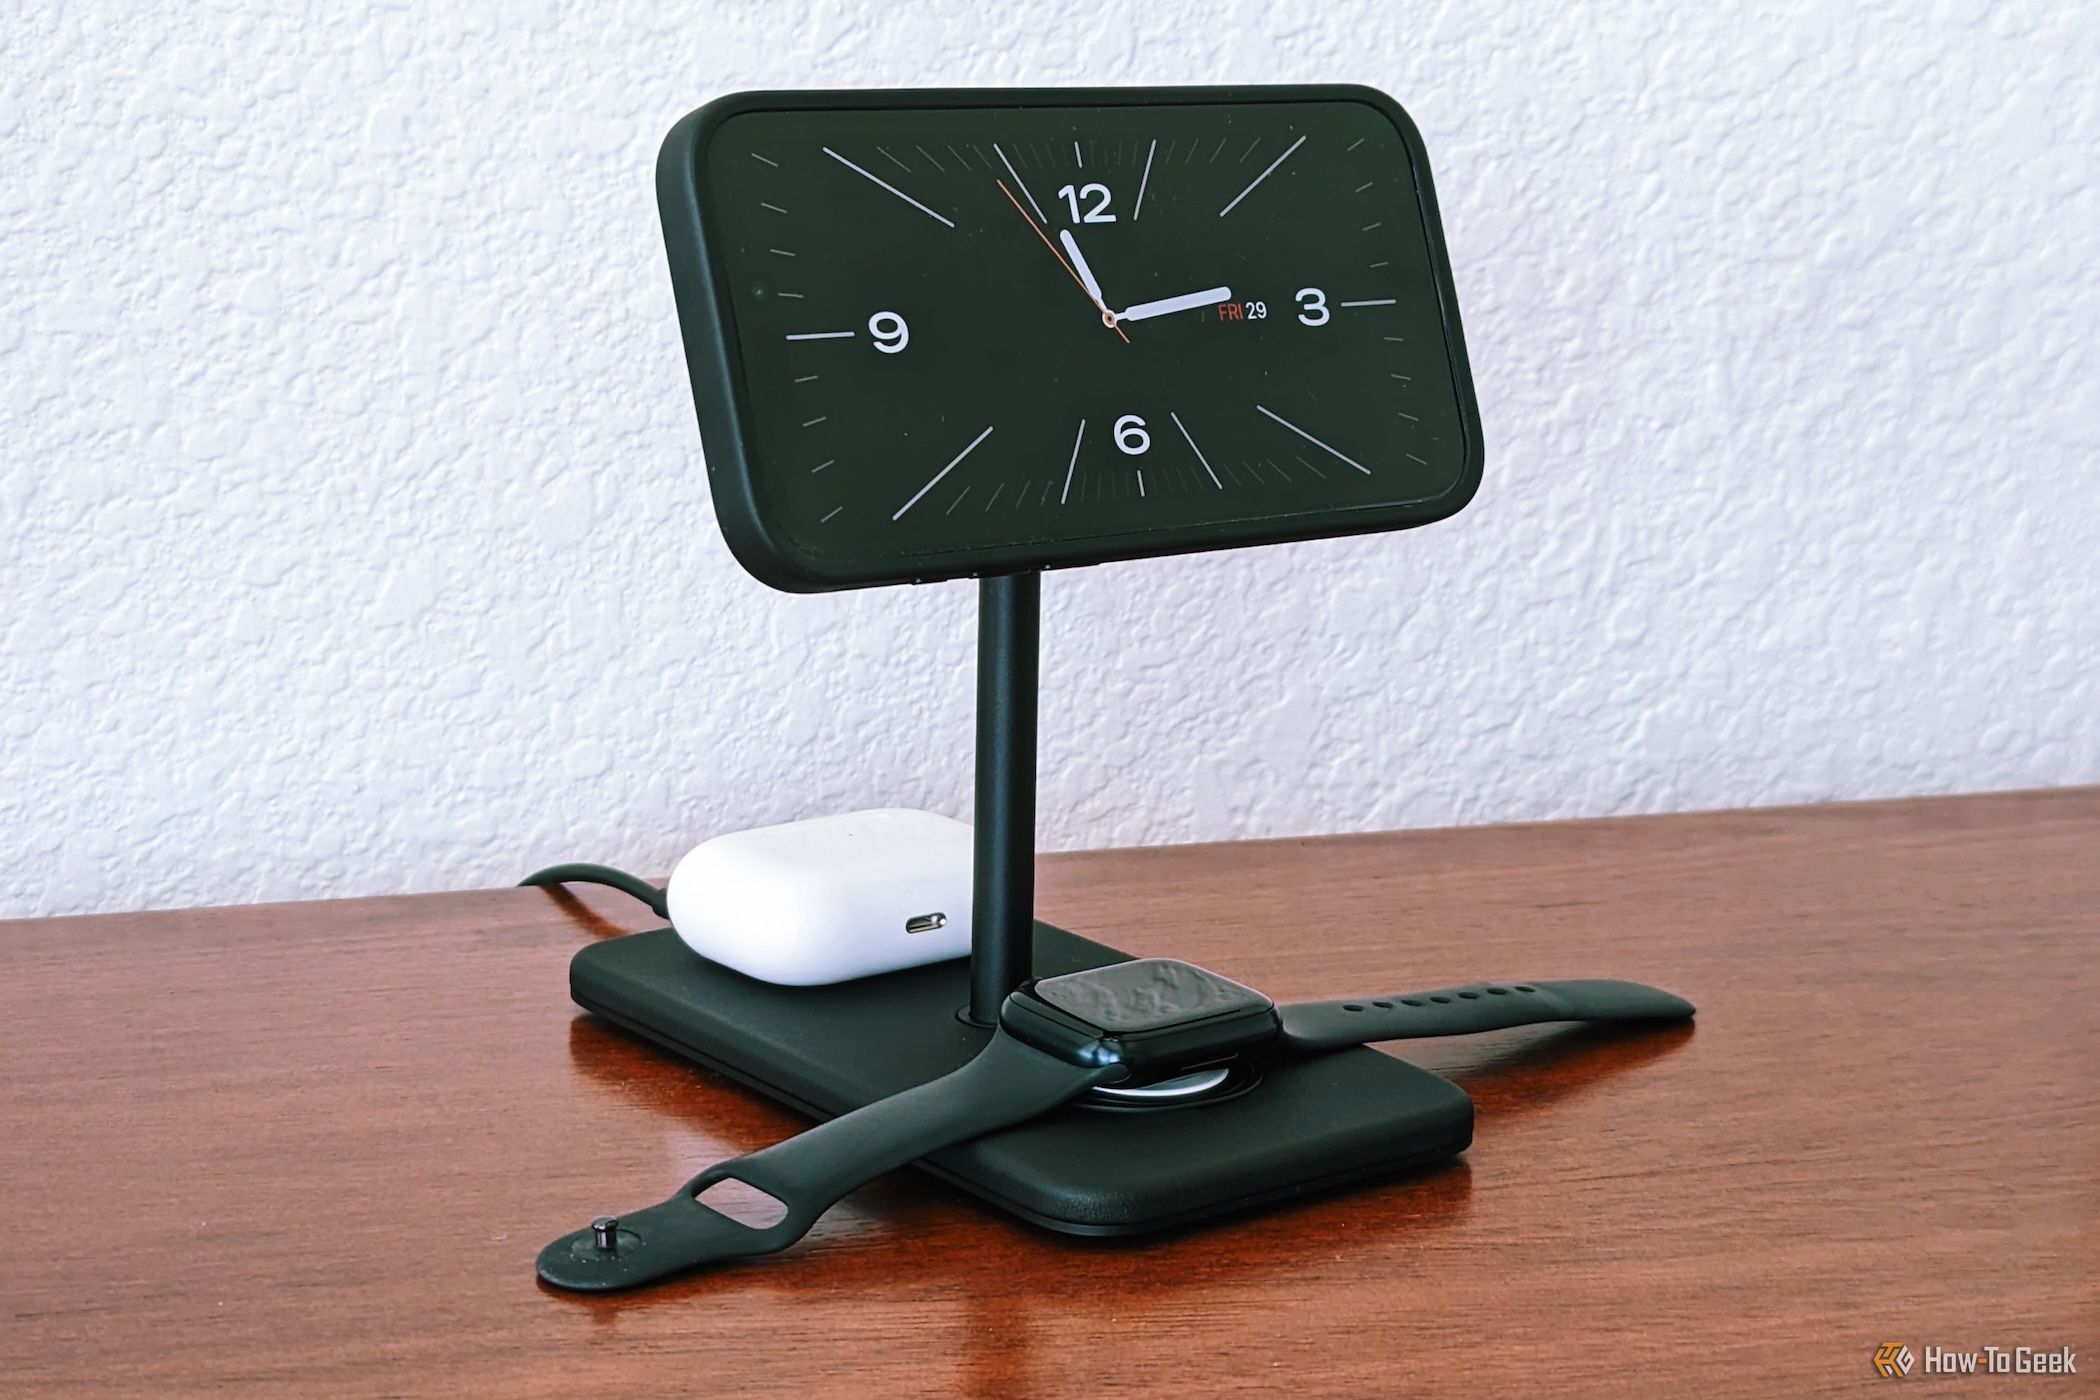 The Twelve South HiRise 3 Deluxe has a 3-in-1 design